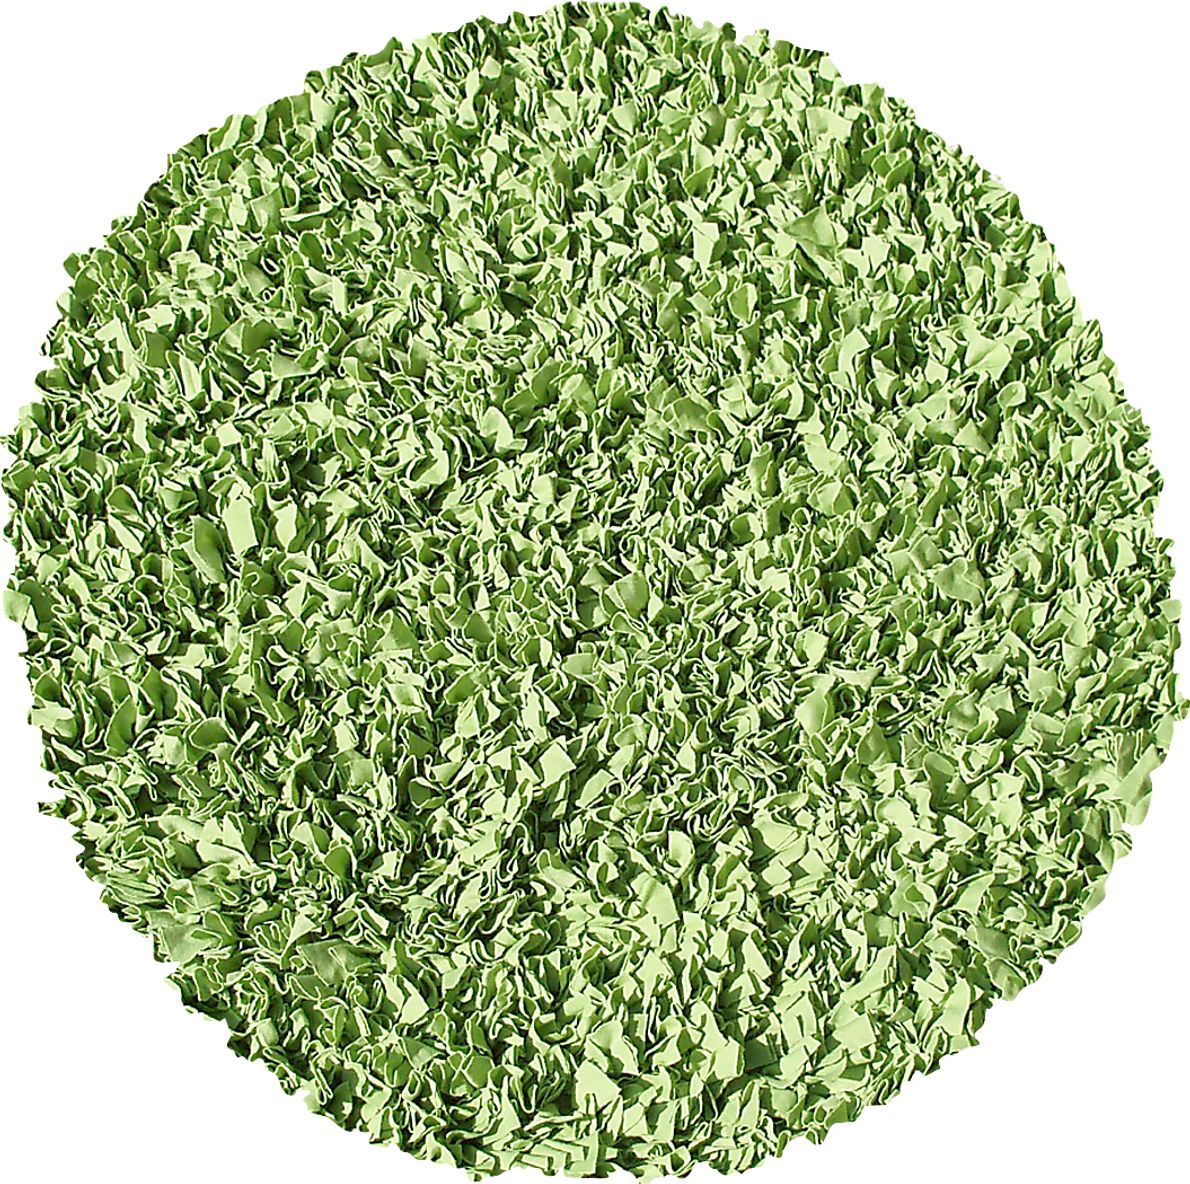 Kids Fuzzy Clouds Lime 4' Round Rug